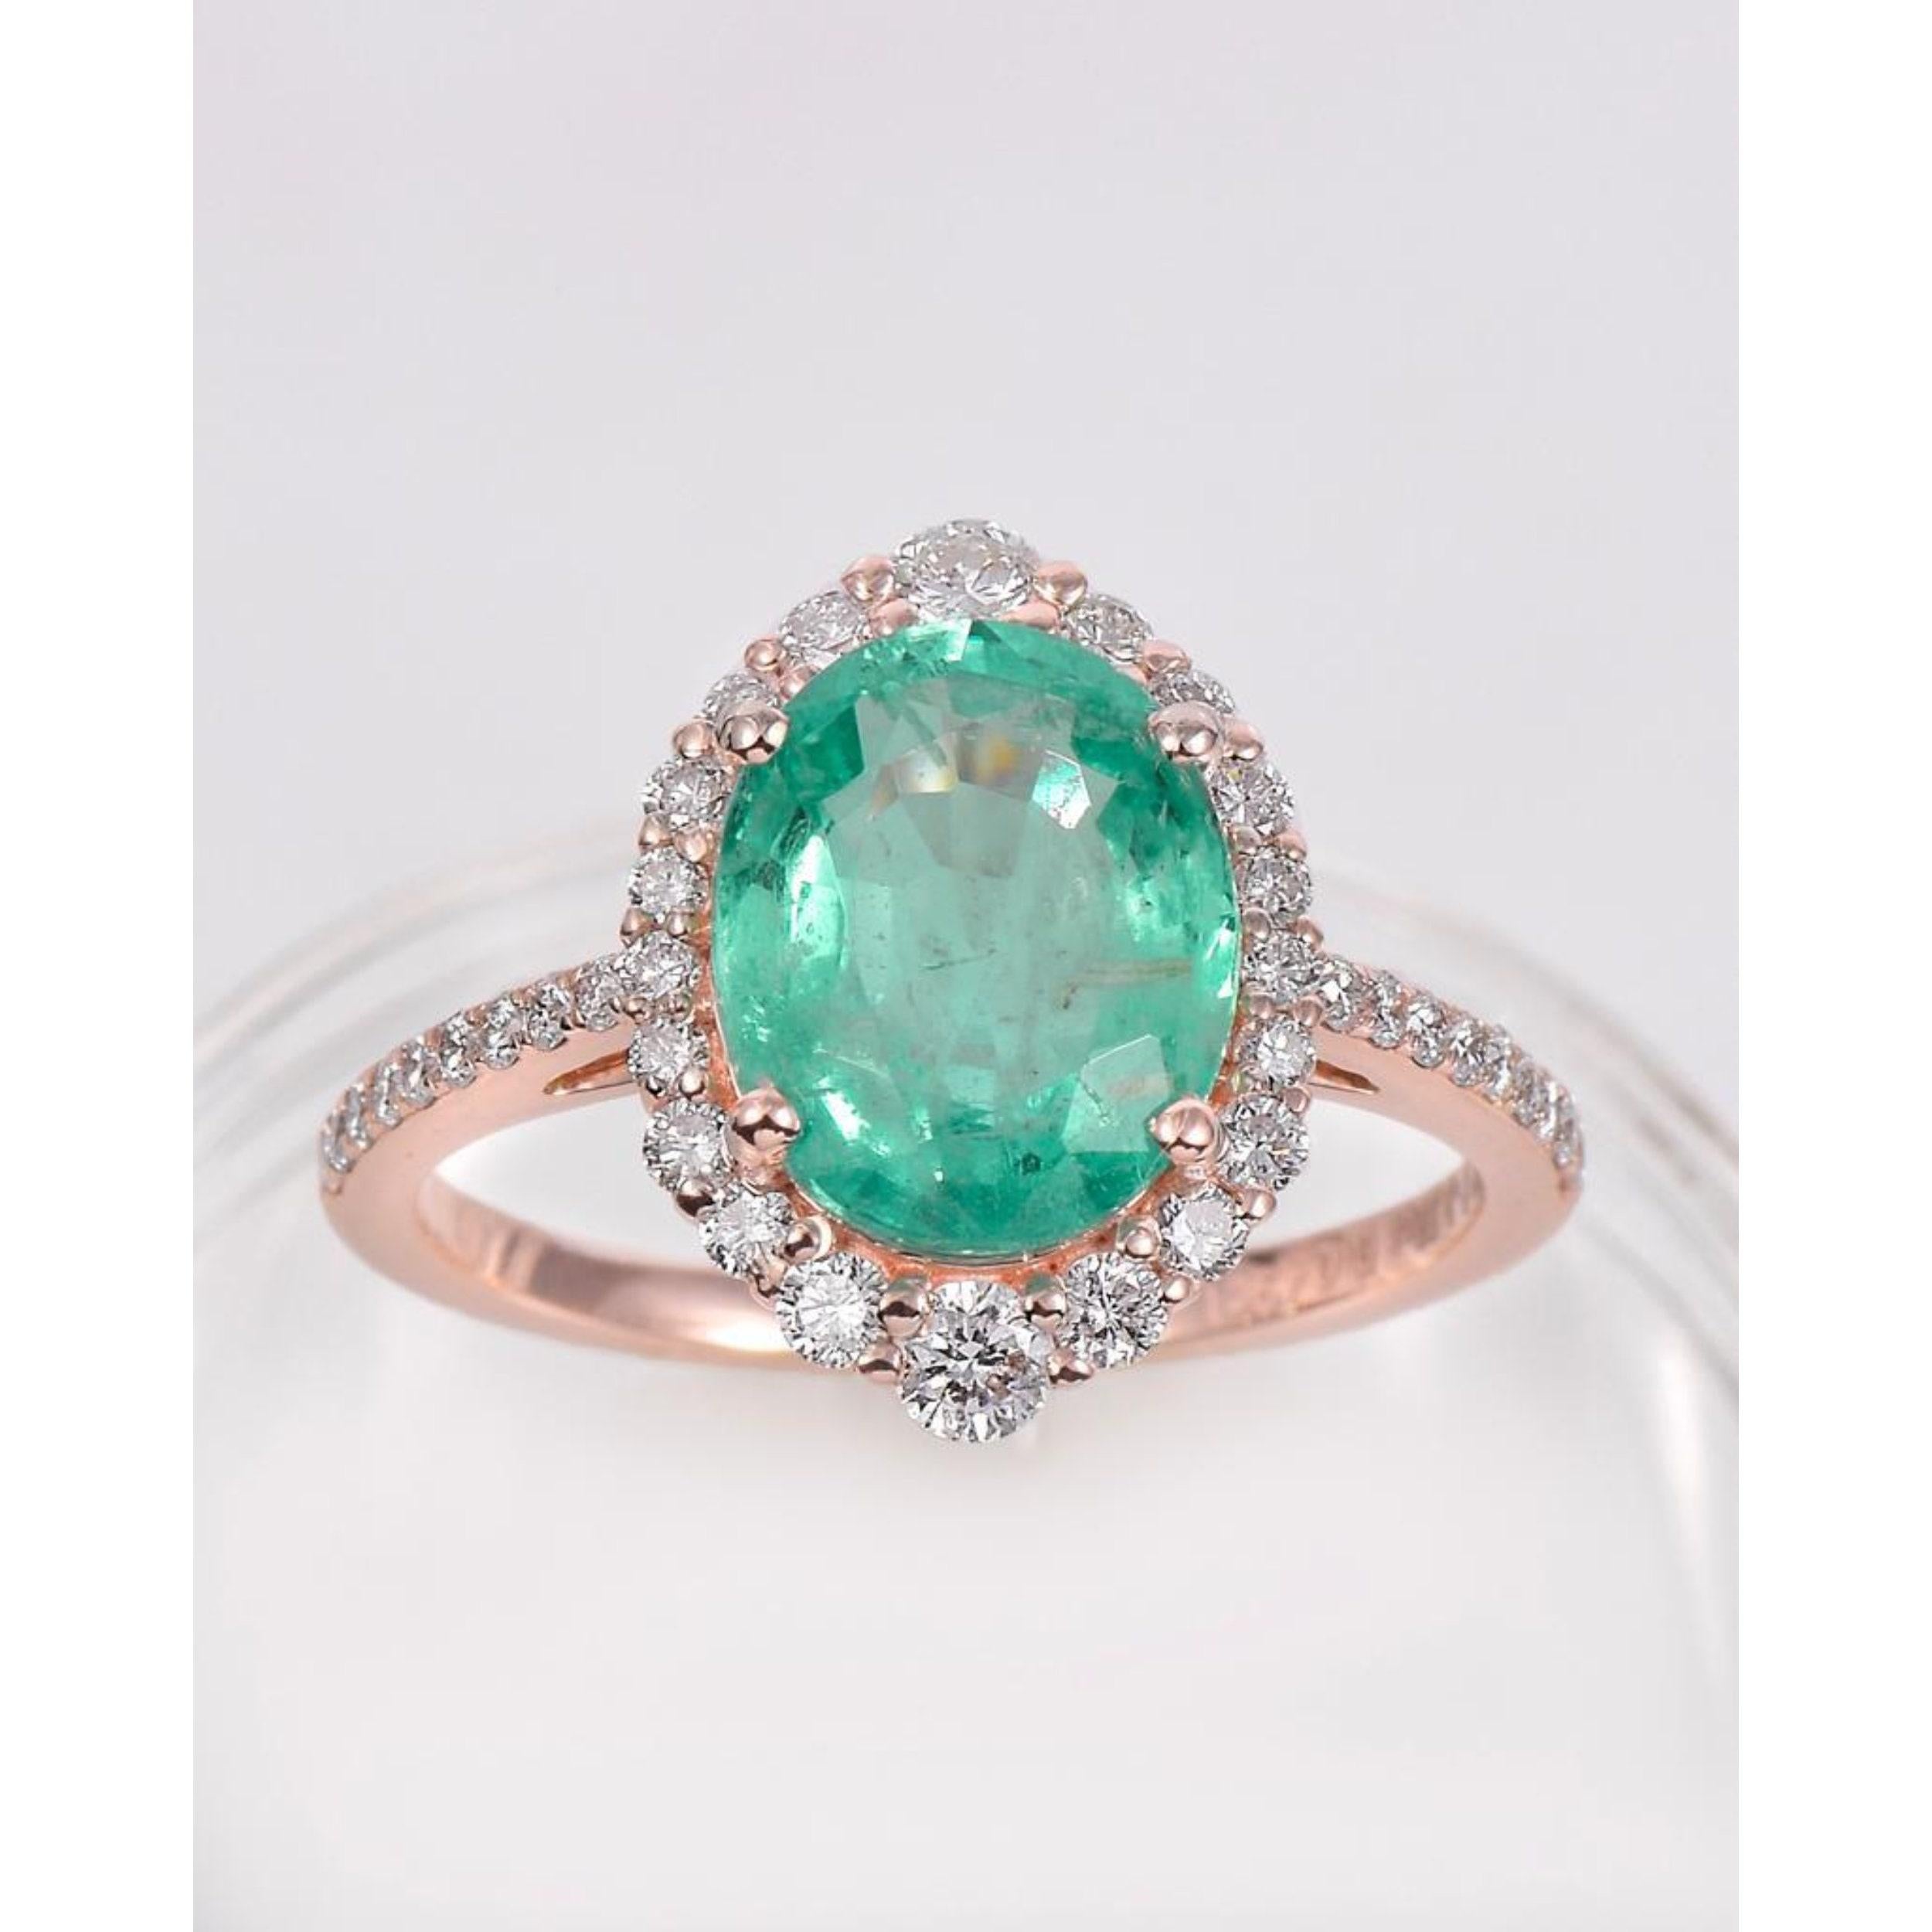 For Sale:  18K Gold 2 CT Natural Emerald and Diamond Antique Art Deco Style Engagement Ring 3